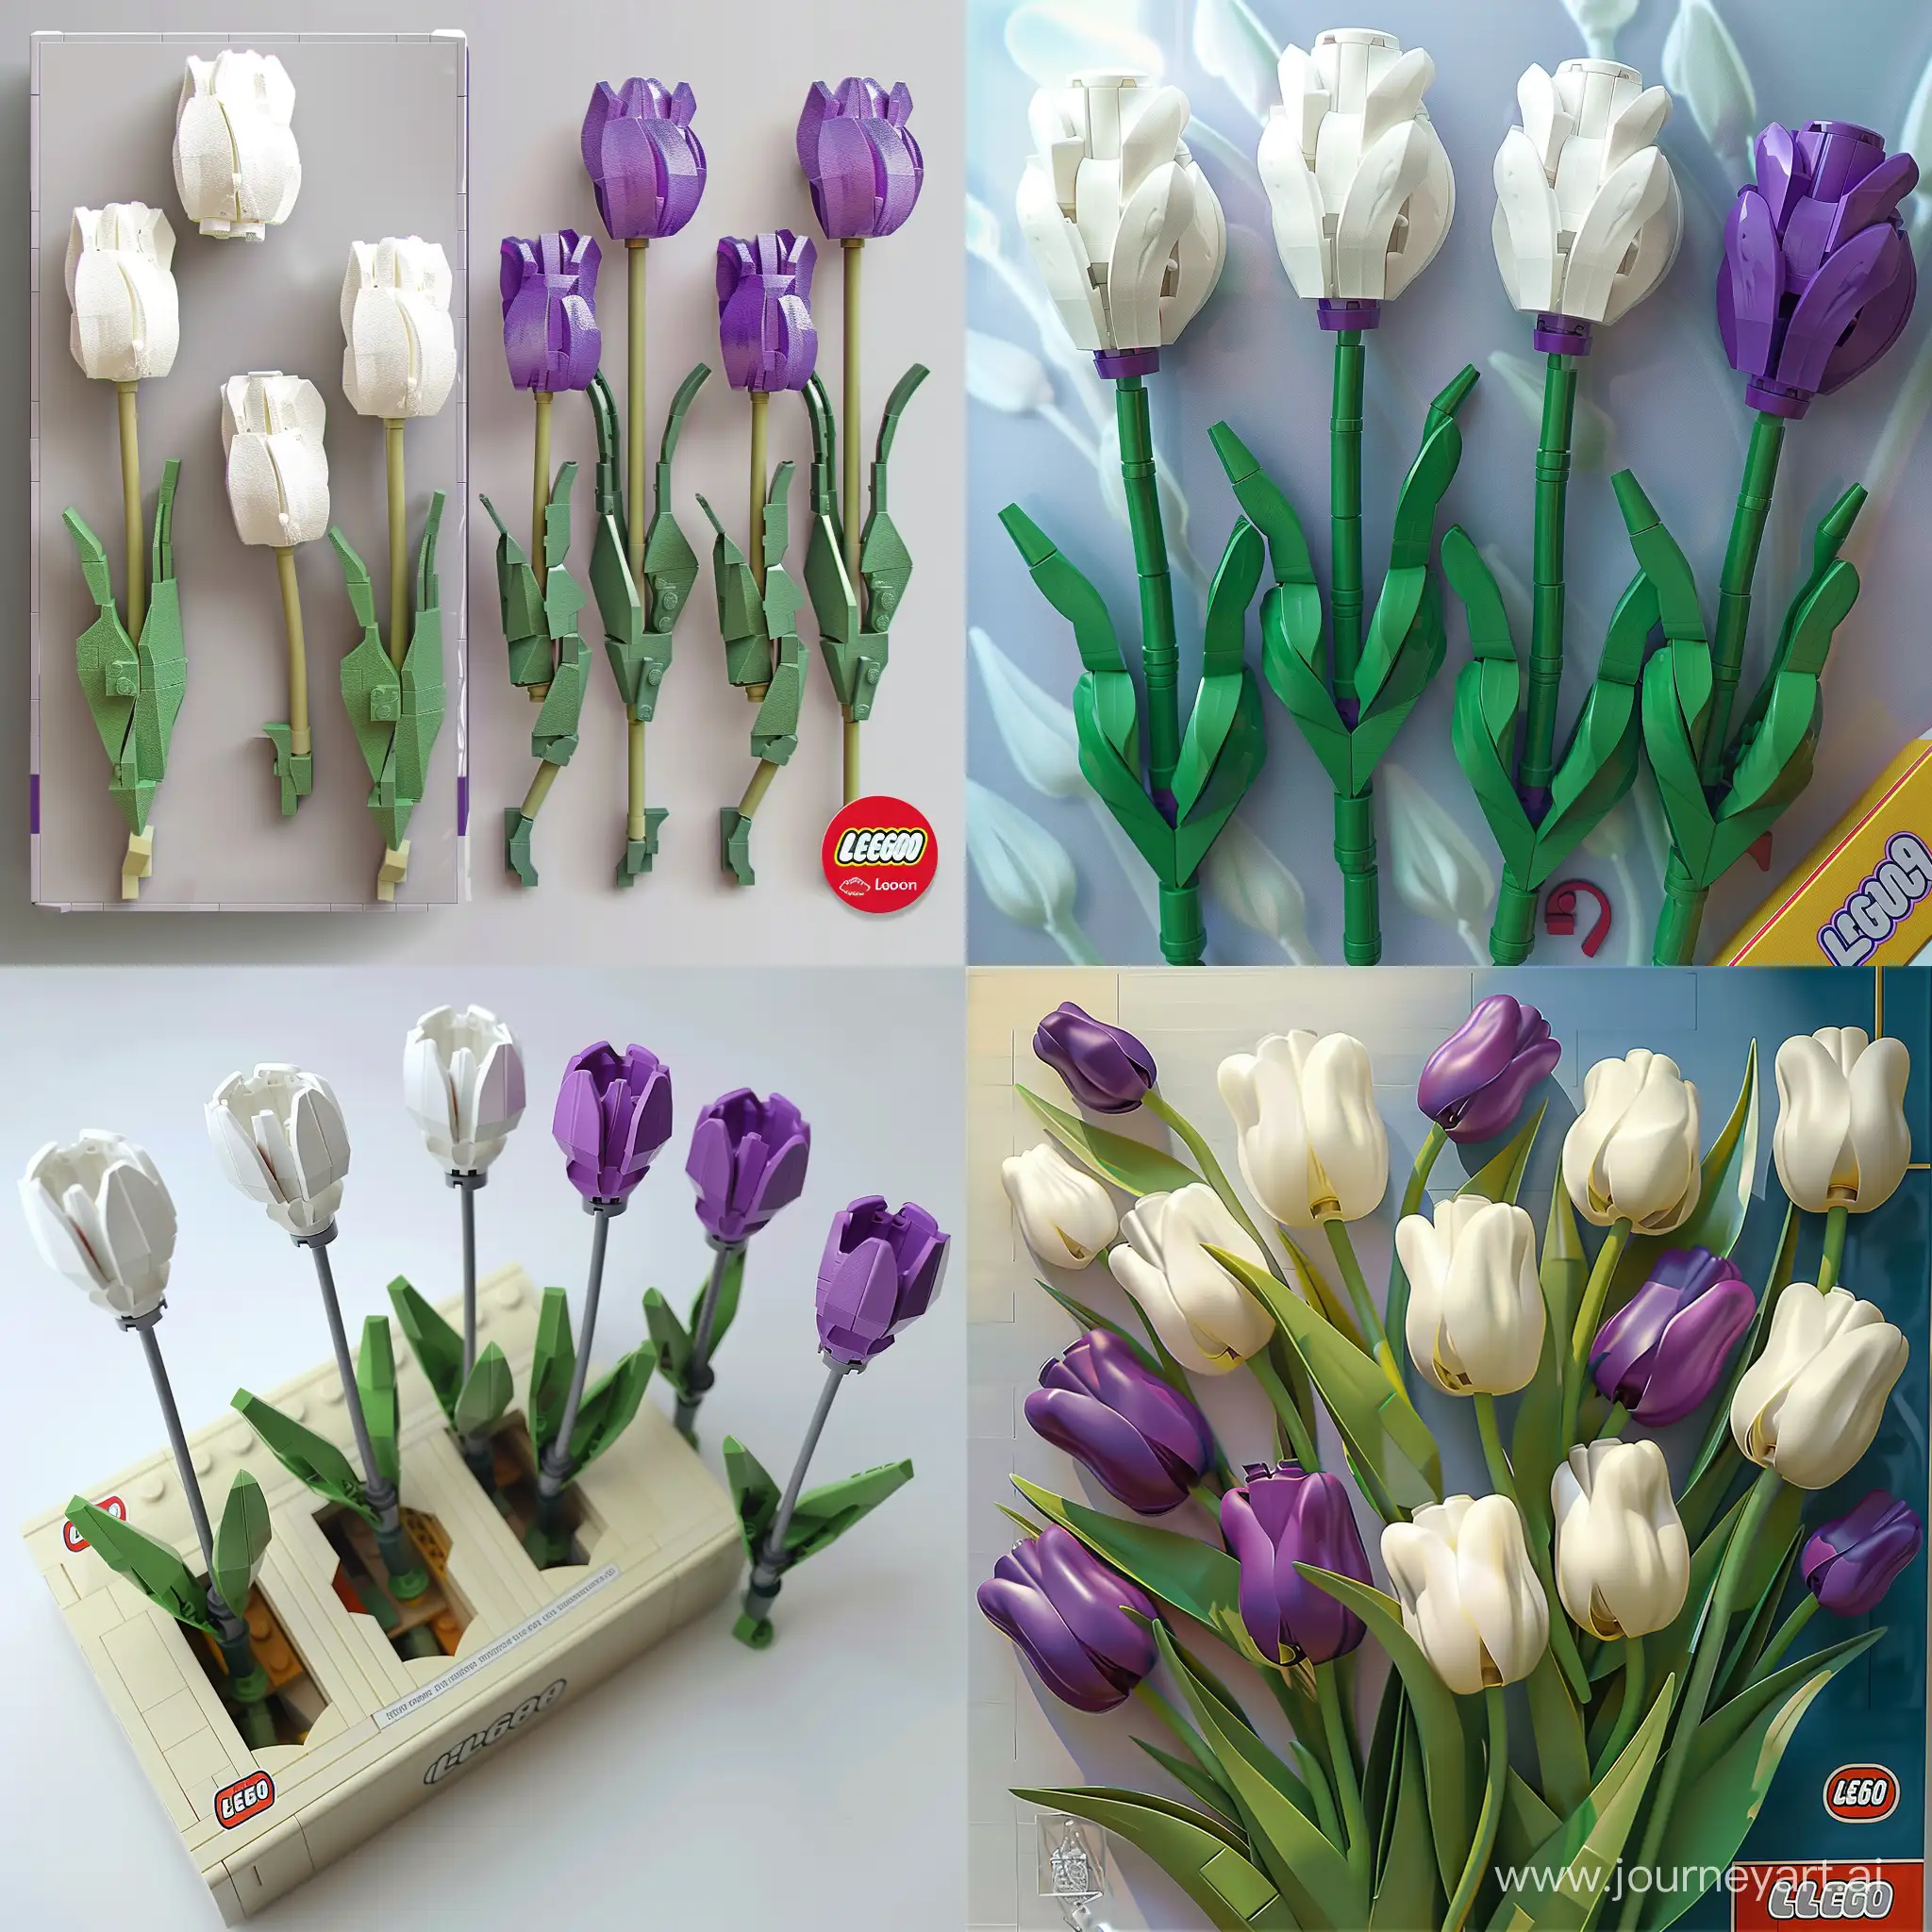 Realistic-LEGO-Tulips-in-White-and-Gentle-Purple-Colors-with-Brilliant-Lighting